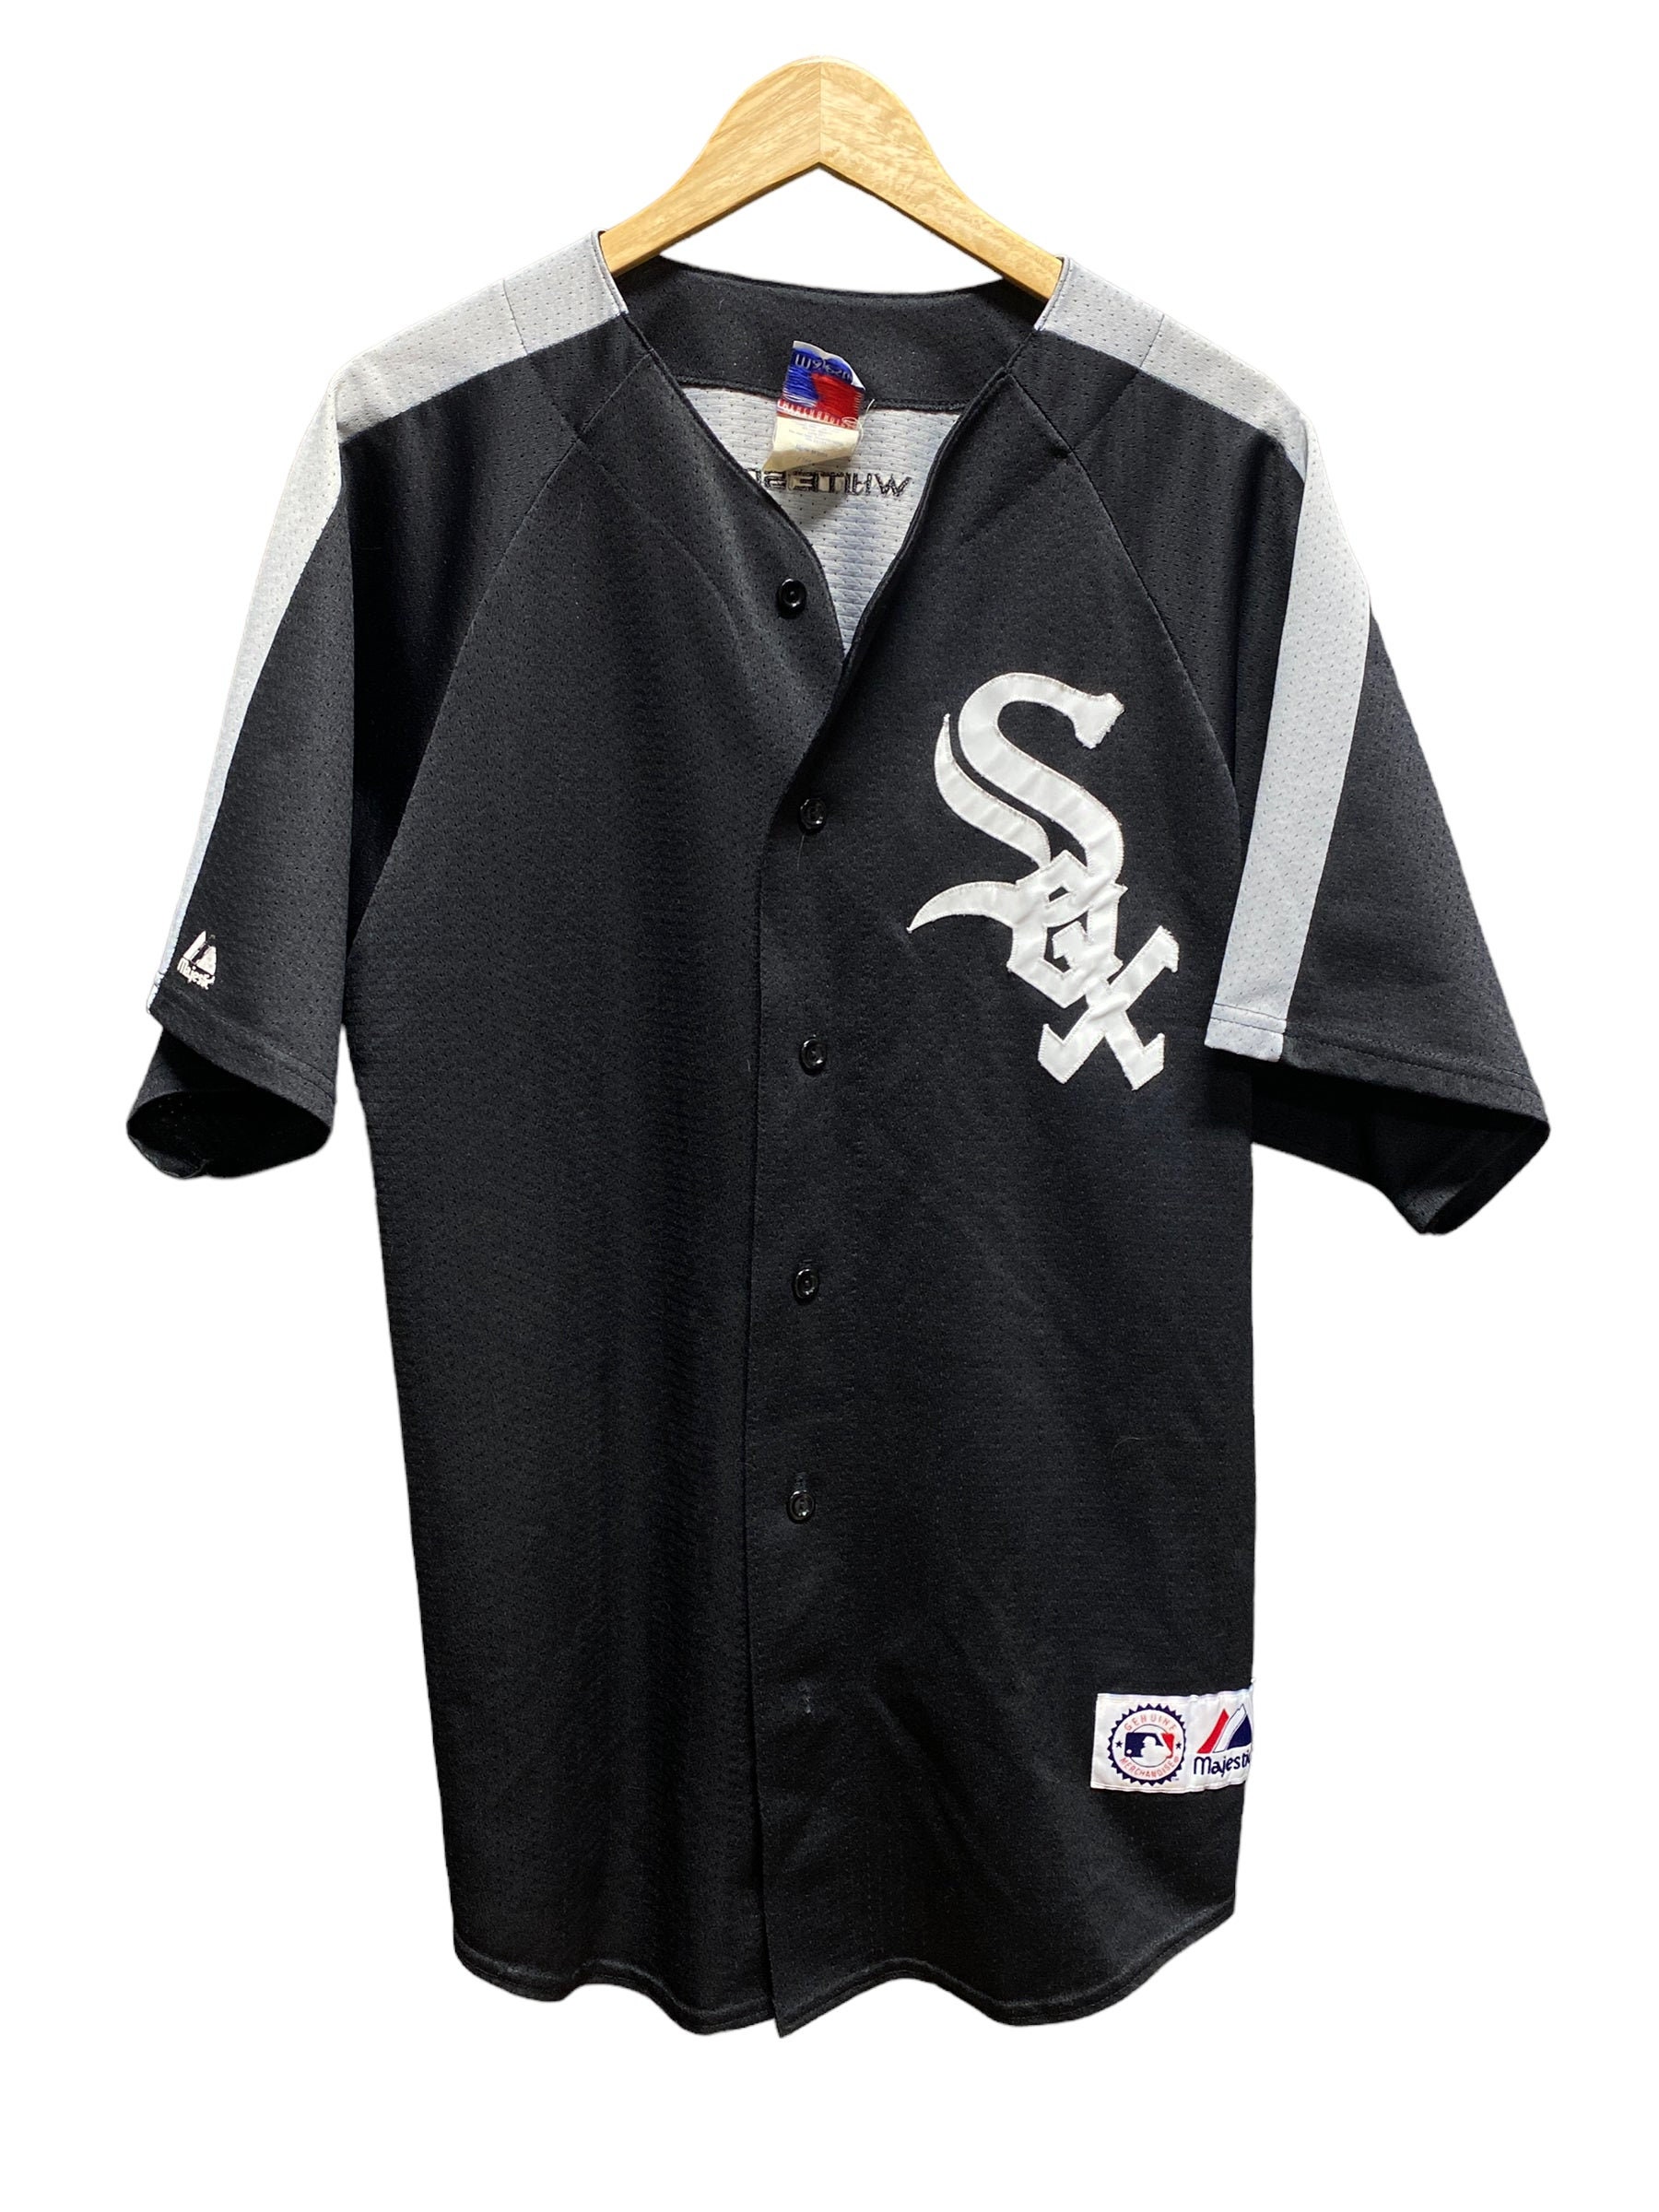 Chicago White Sox Baseball Jersey Majestic Genuine Merchandise Made in USA  XL